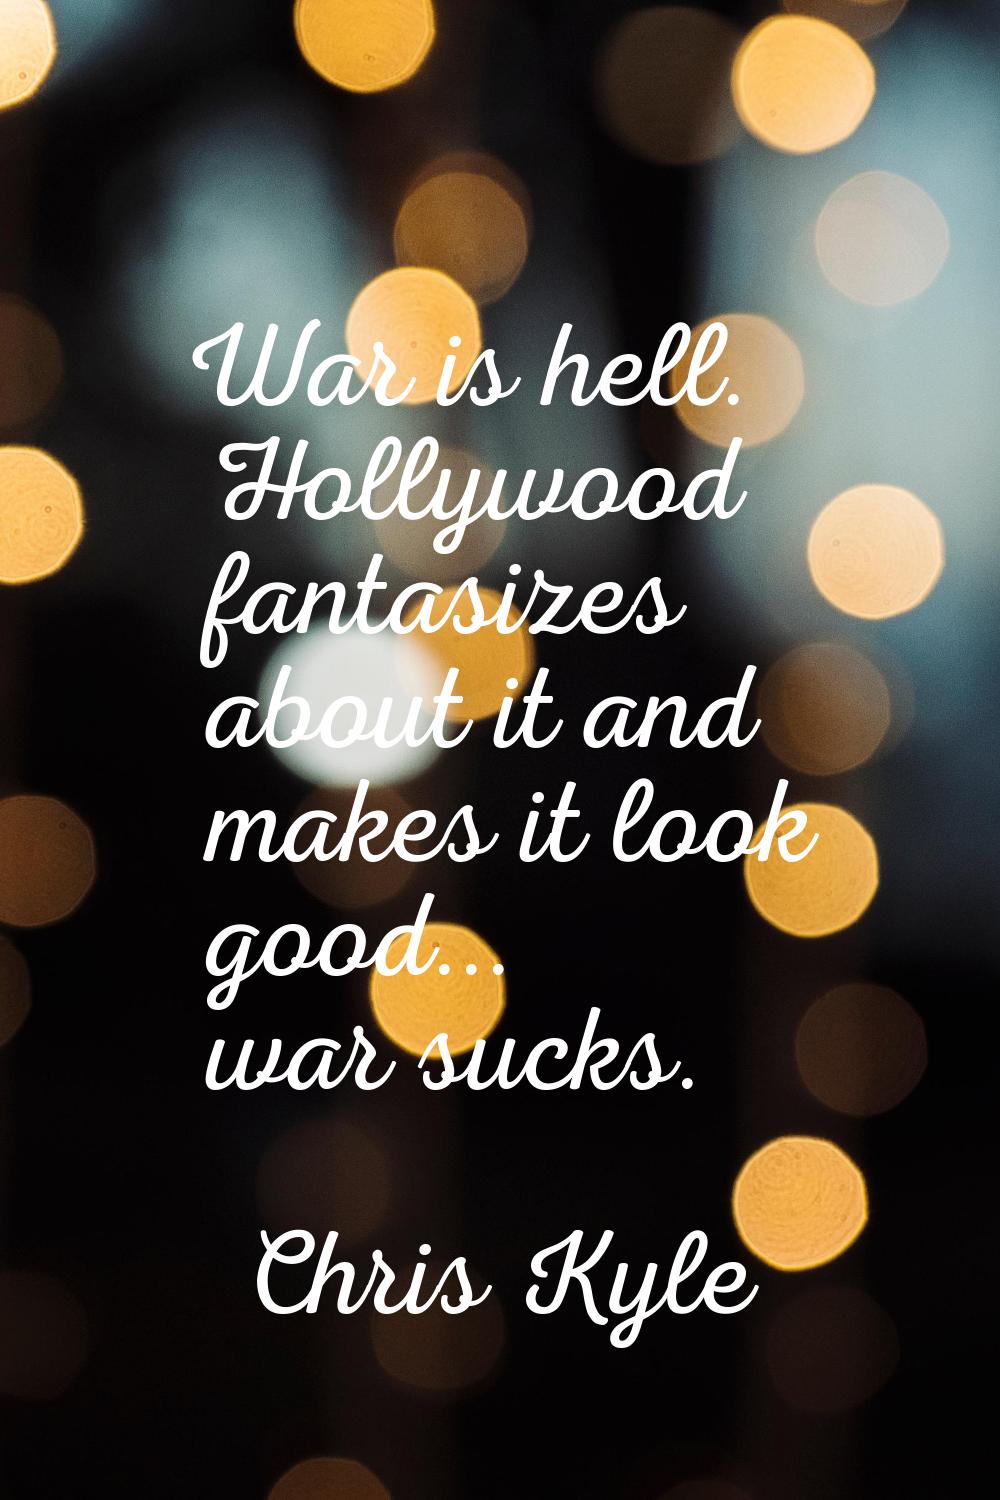 War is hell. Hollywood fantasizes about it and makes it look good... war sucks.